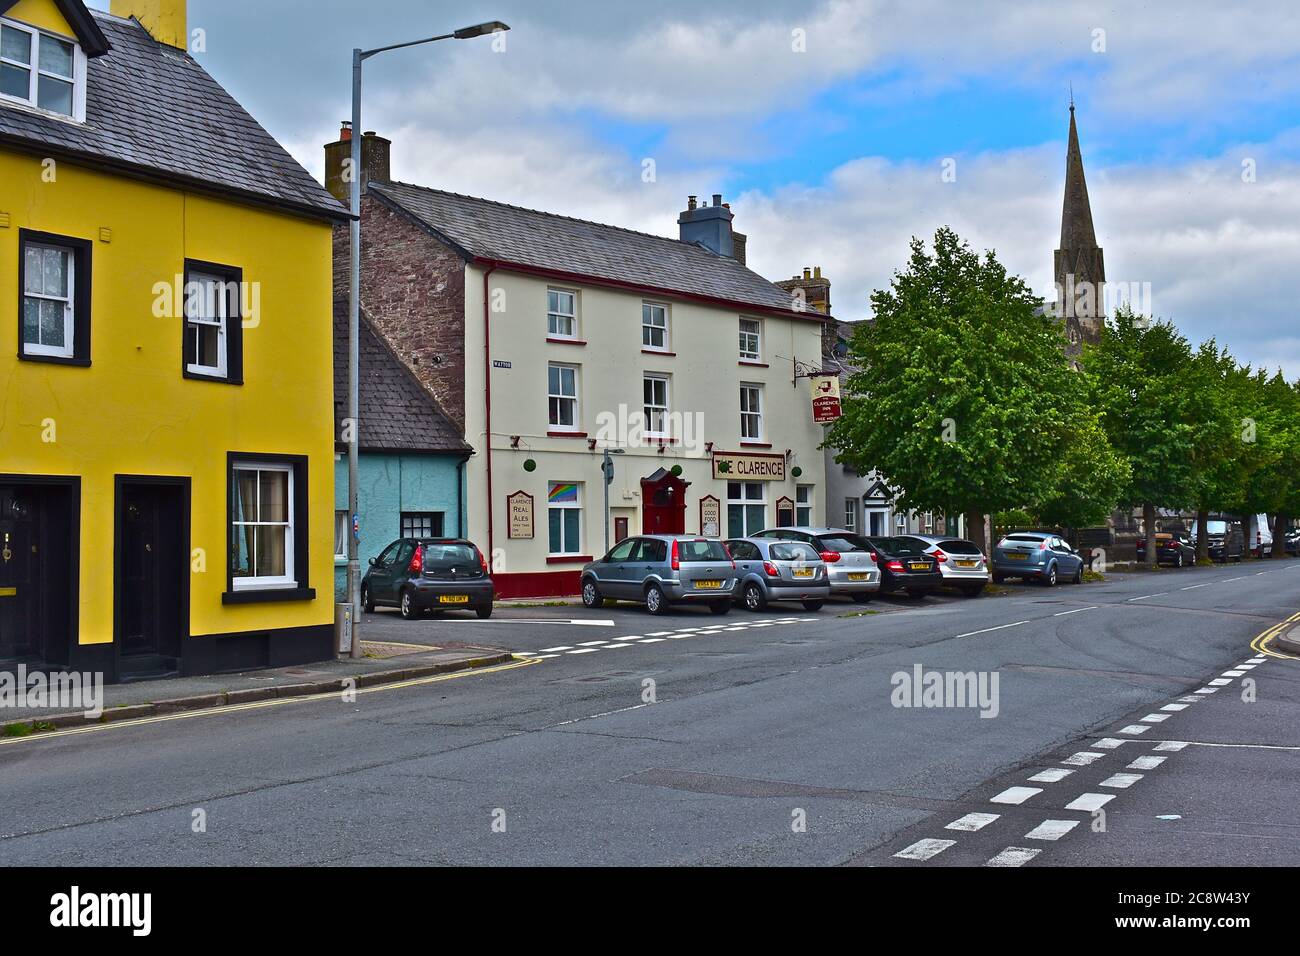 A  view of The Clarence Inn, a traditional public house in the street called 'Watton', in the rural market town of Brecon. Spire of Presbyterian Churc Stock Photo